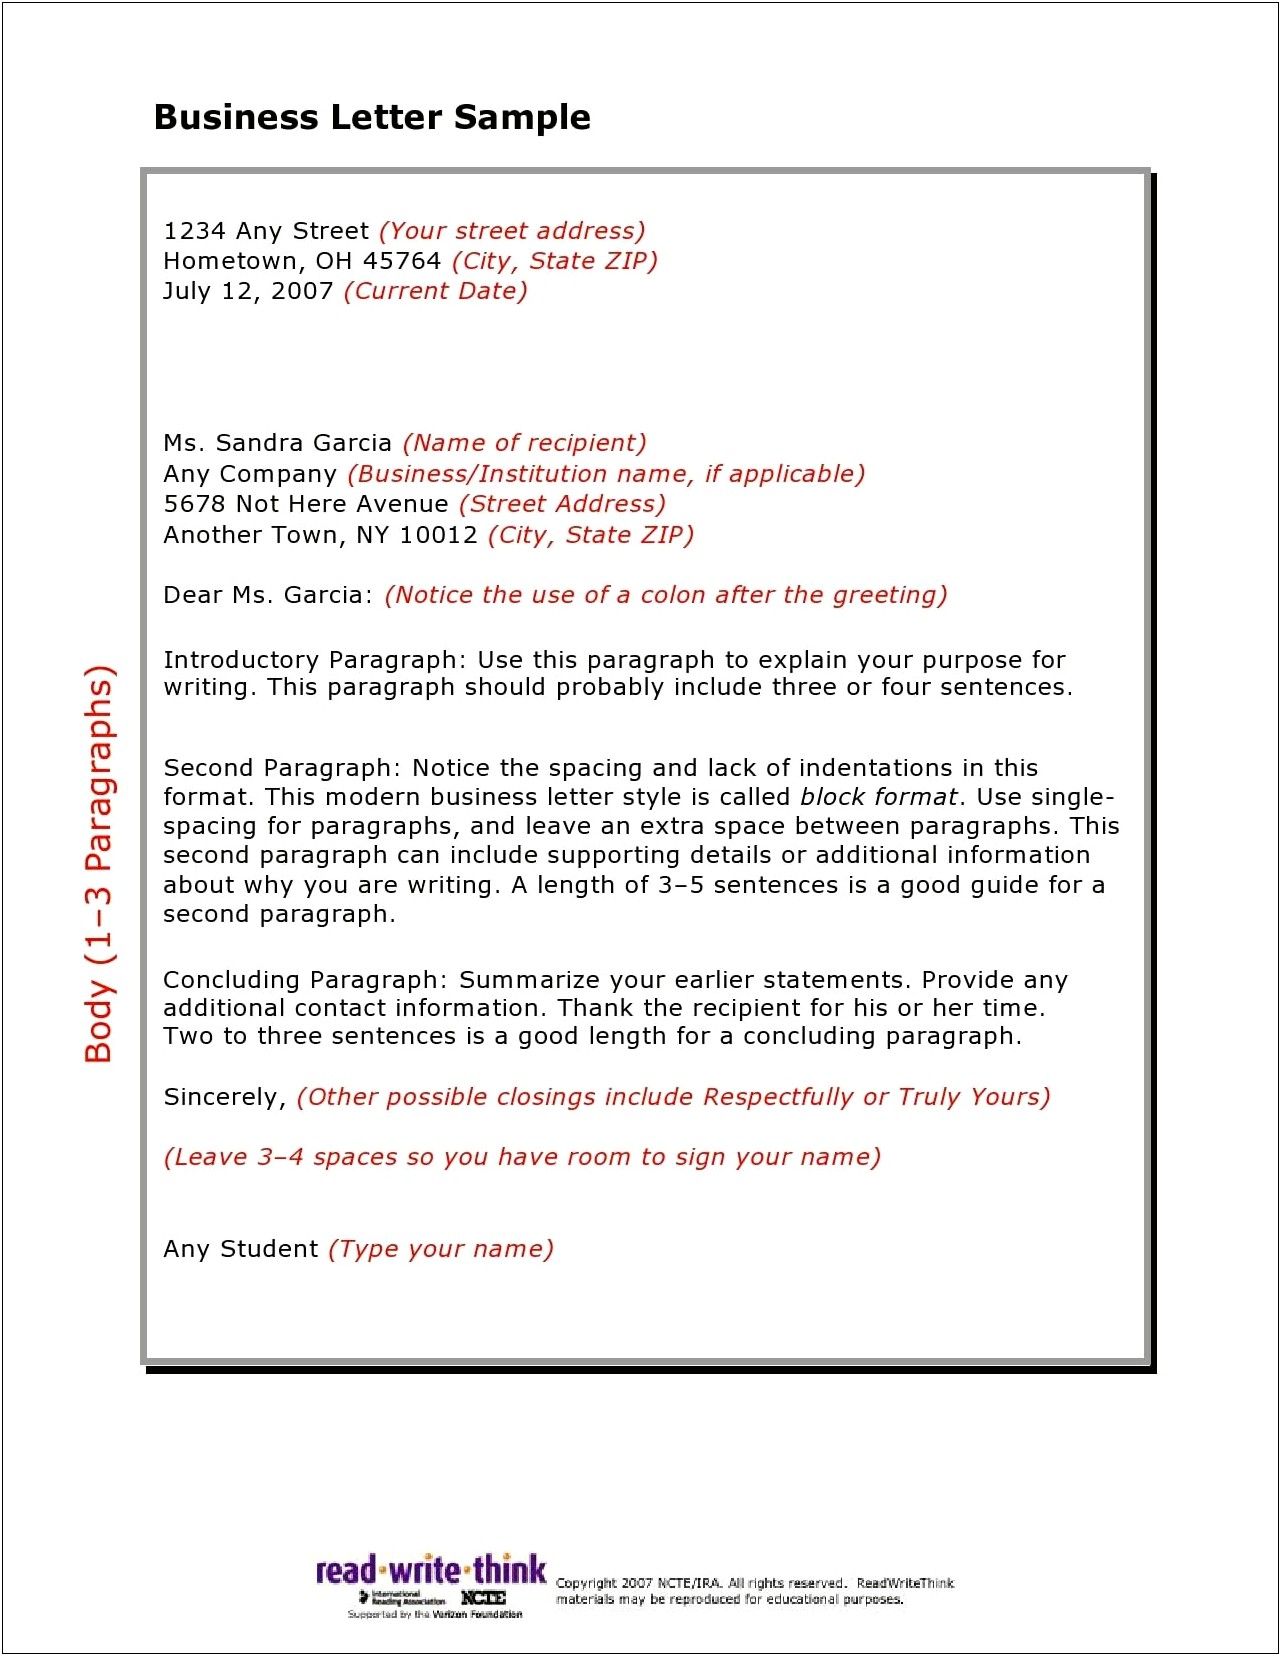 Does Microsoft Word Have A Business Letter Template